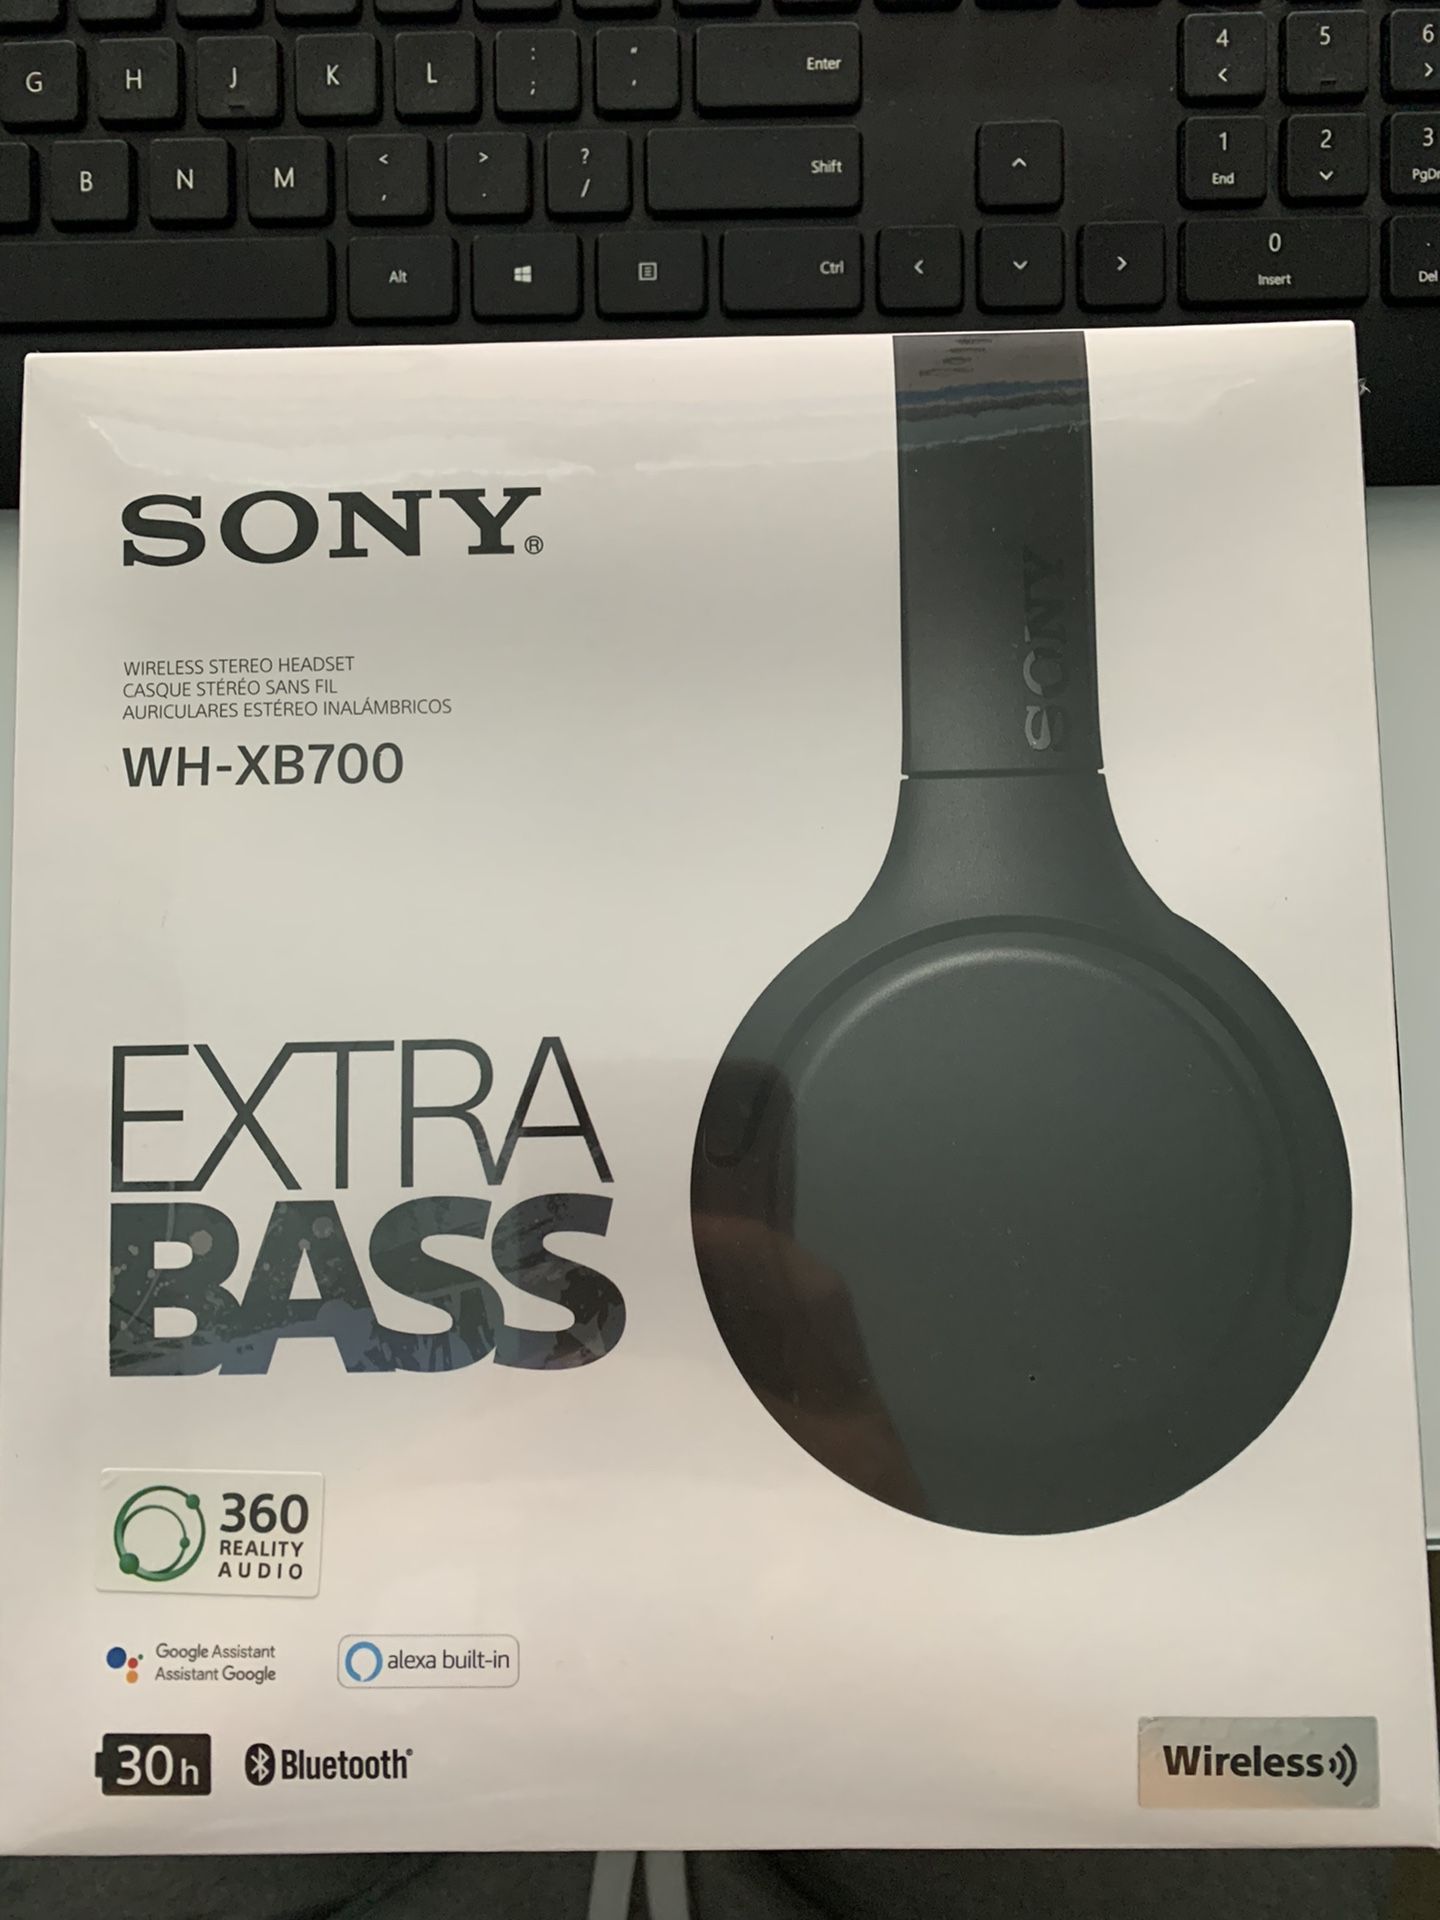 Sony WH-XB700 Wireless Stereo Headset Extra Bass